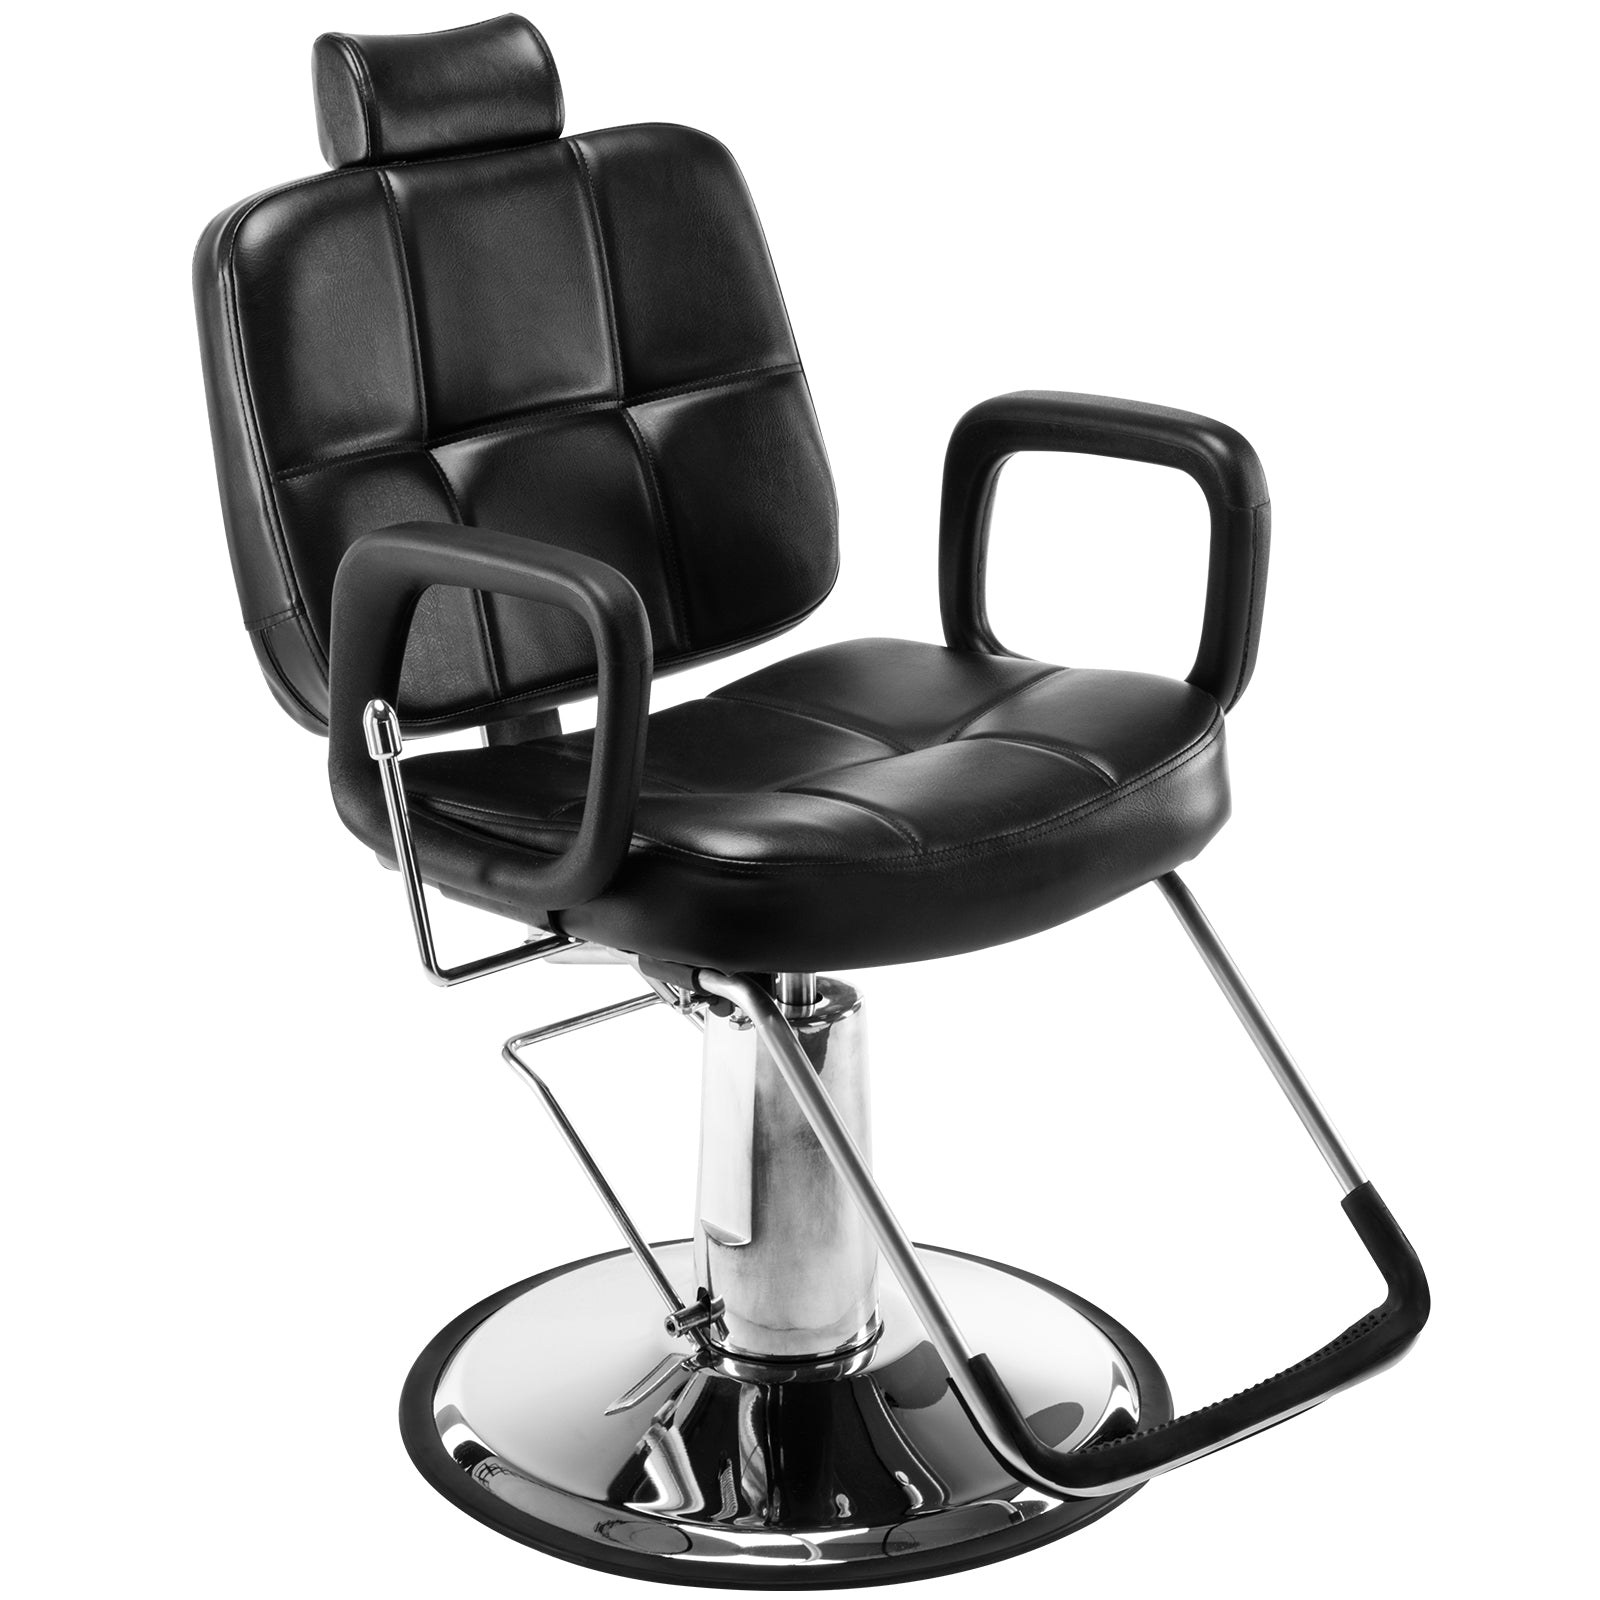 #5005 All Purpose Hydraulic Reclining Barber Chair